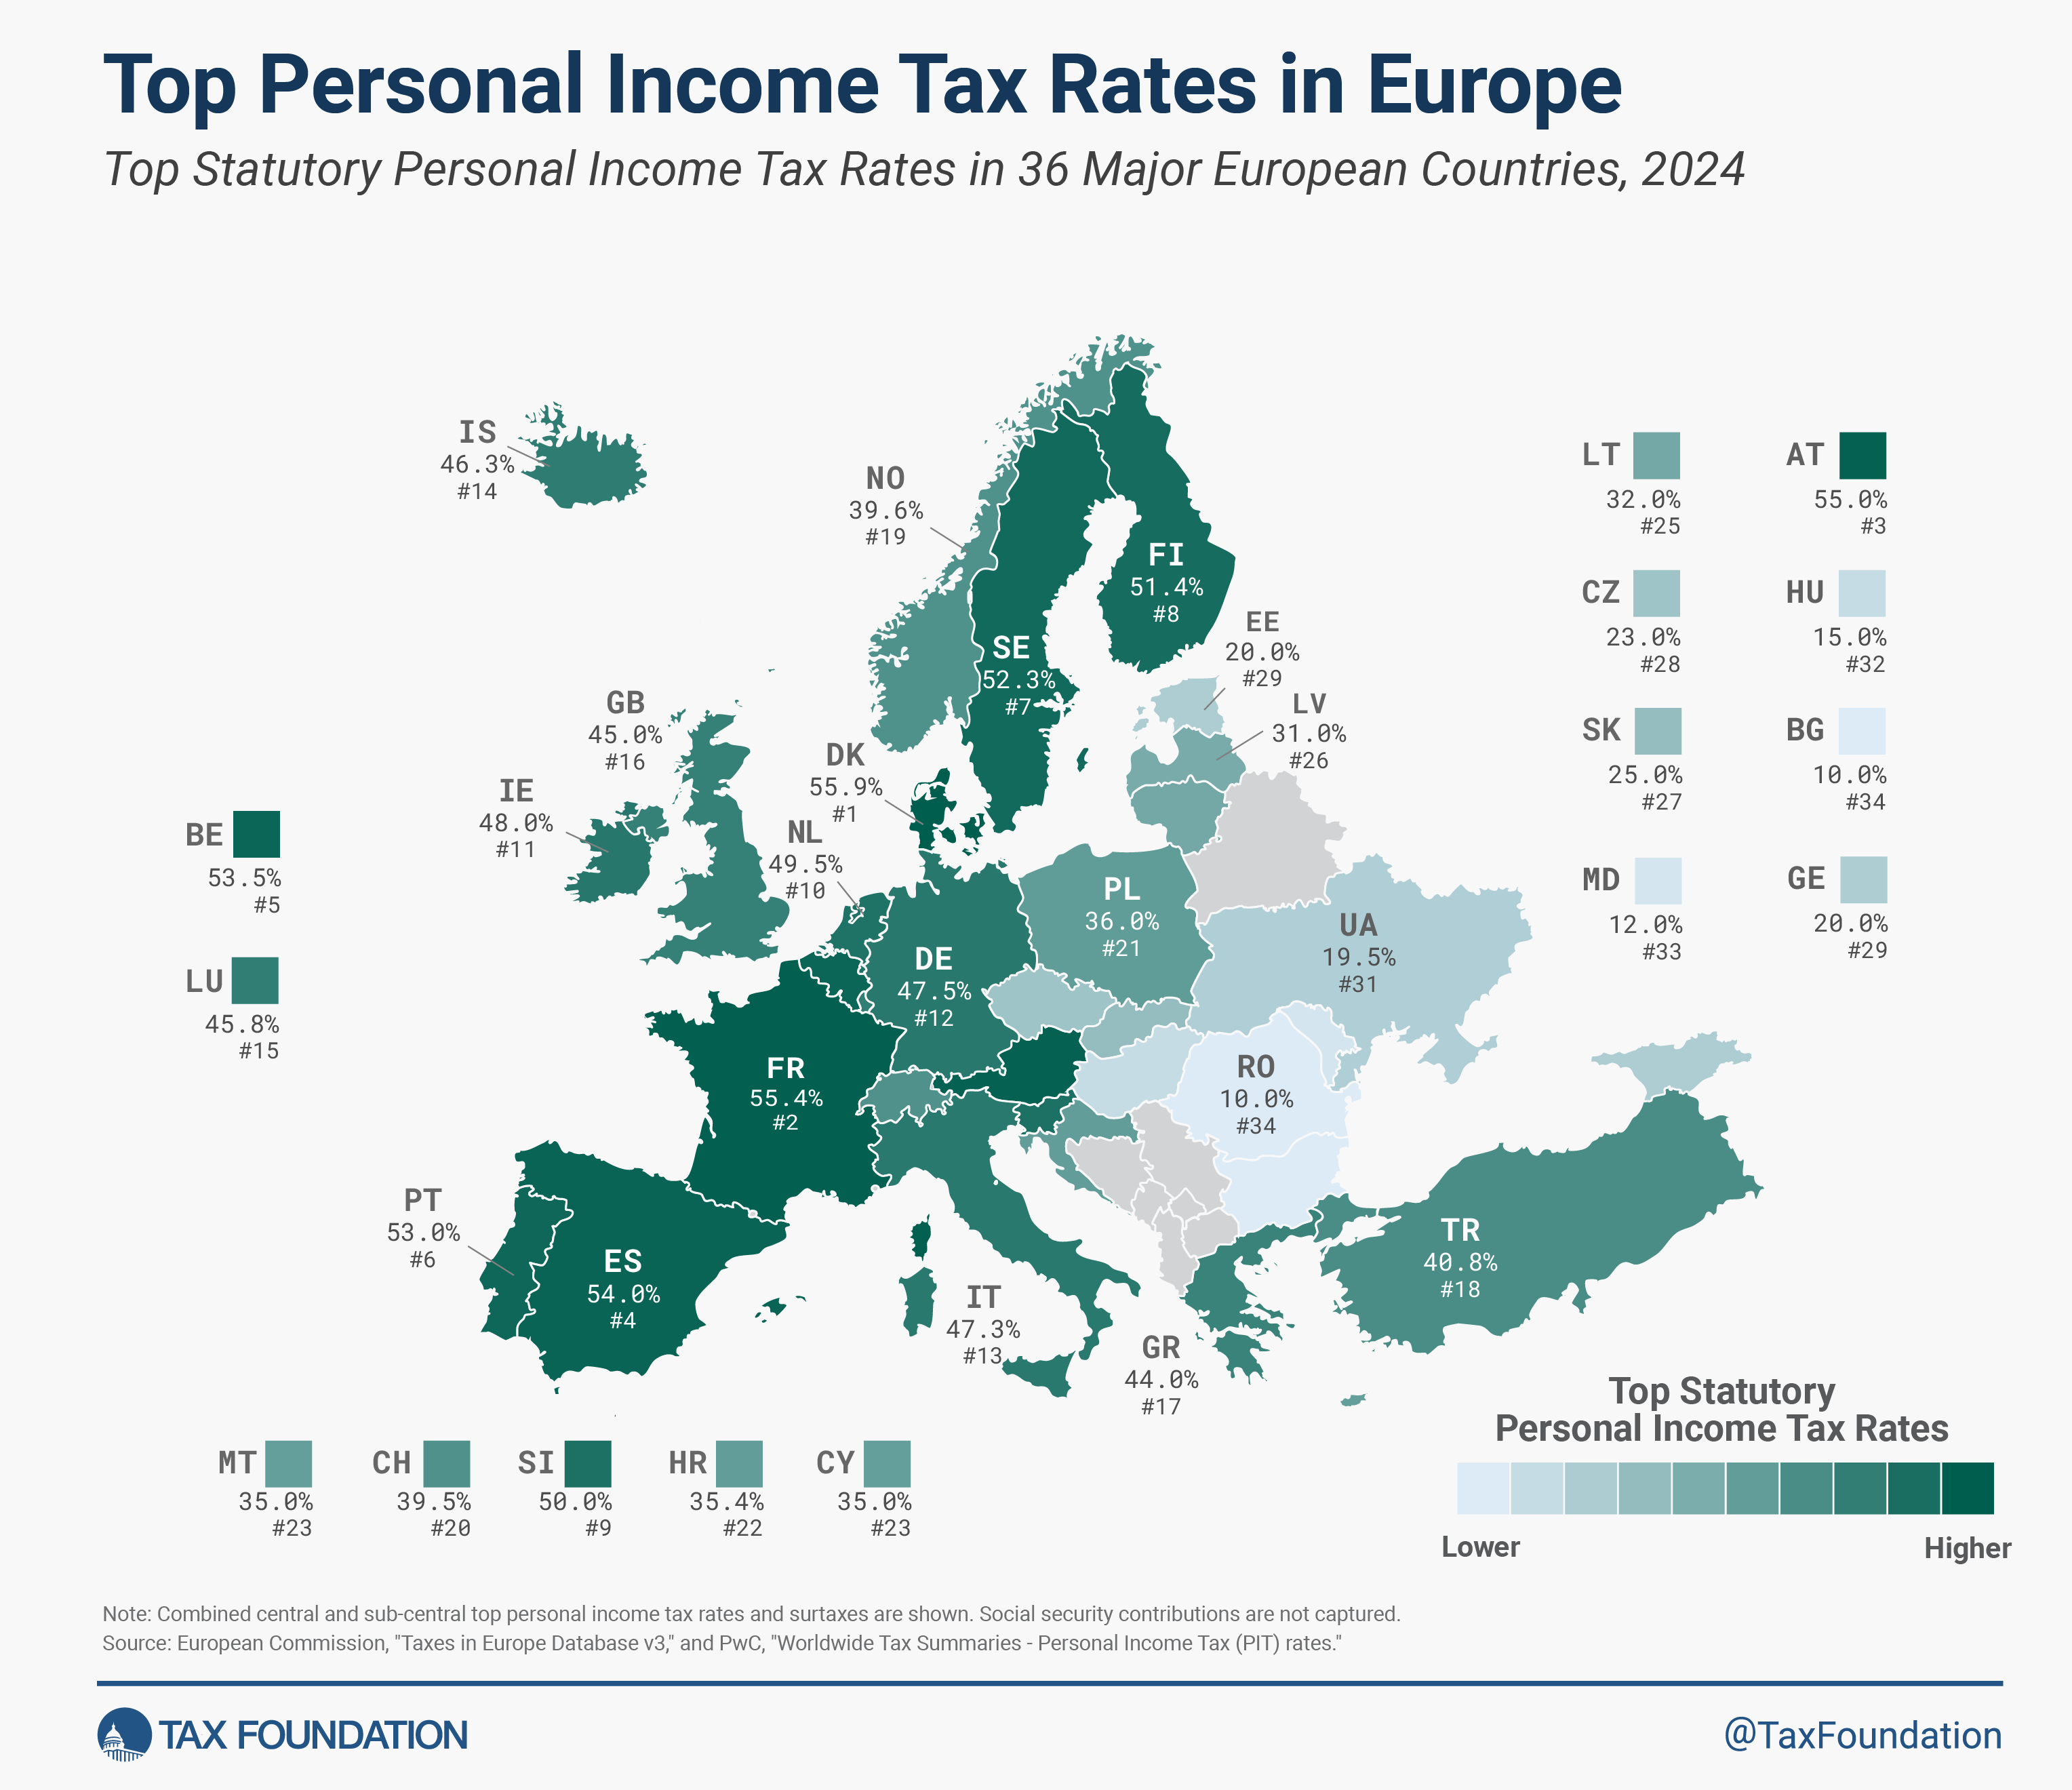 2024 Top Personal Income Tax Rates in Europe